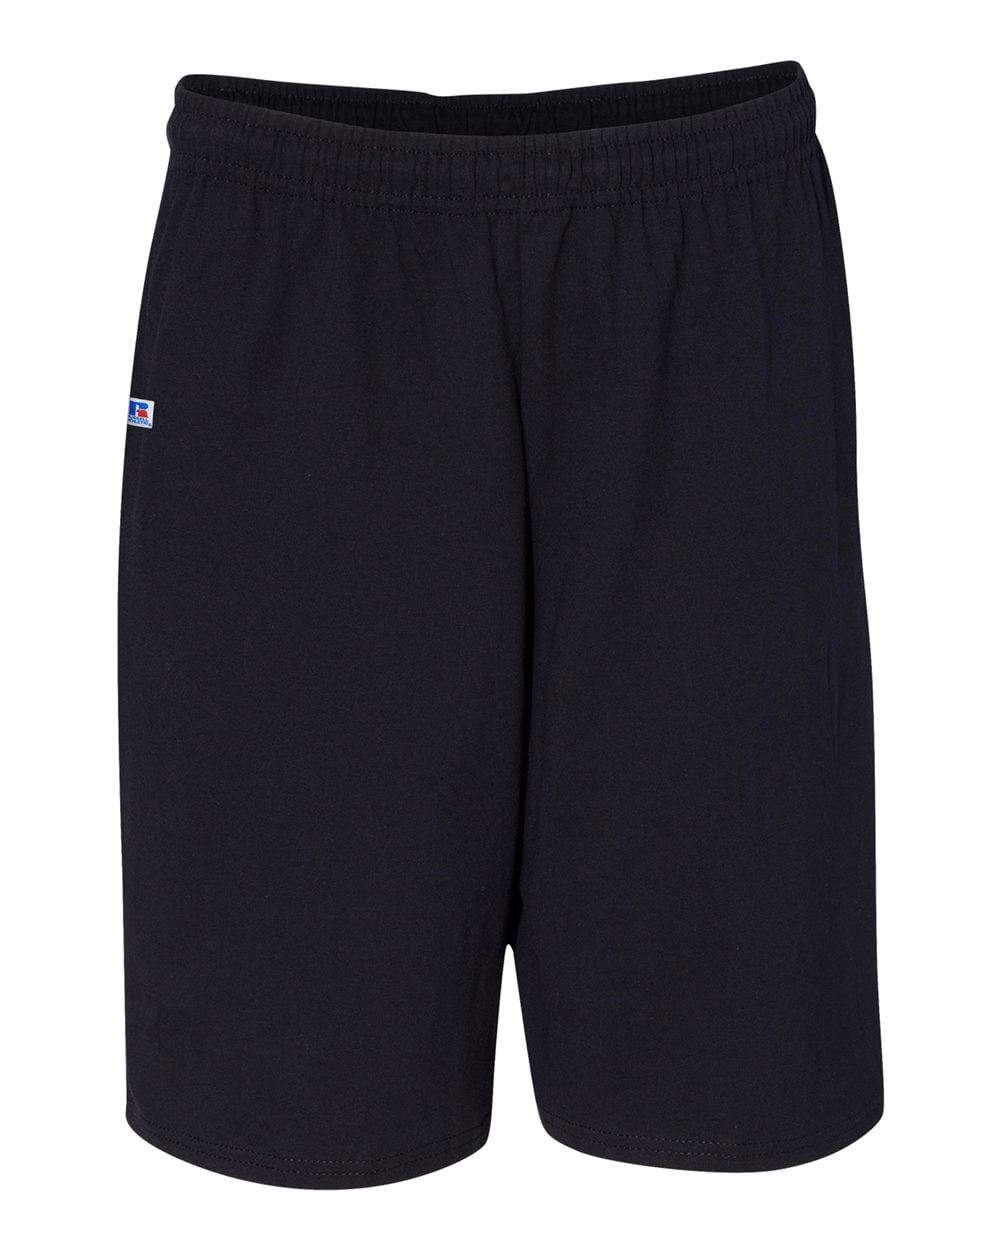 Champion Mens Poly Mesh 9" Inseam Gym Shorts with Pocket S162 S-2XL Basketball 